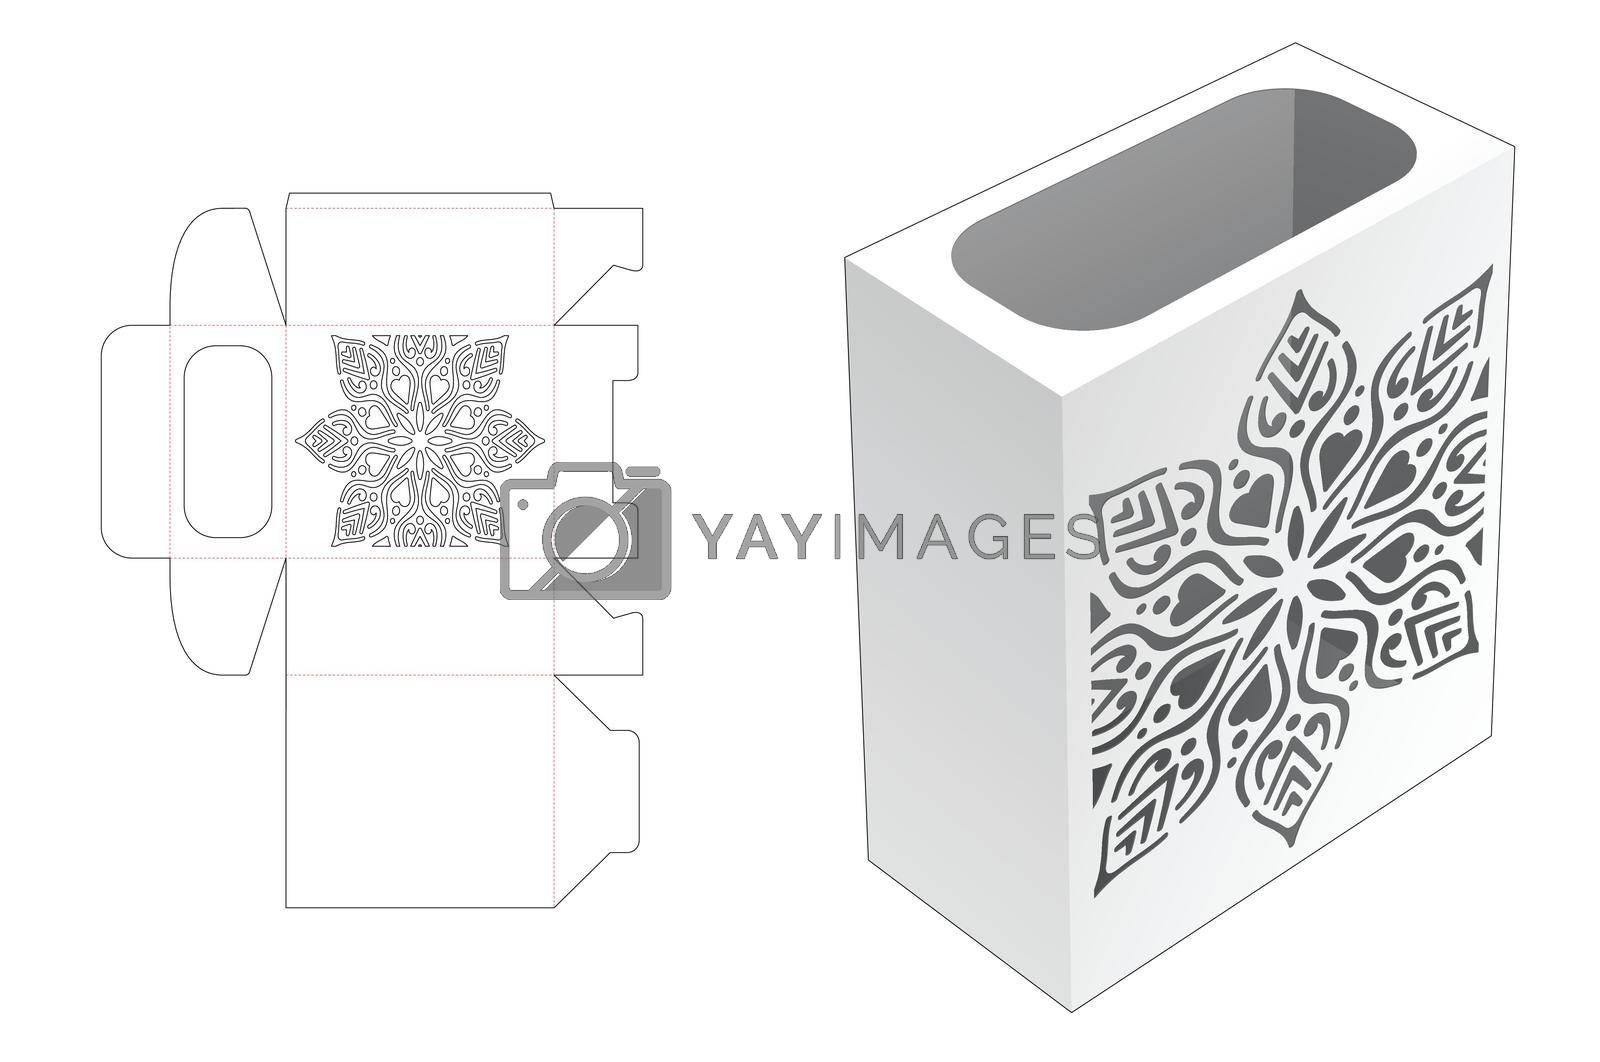 Royalty free image of Vote box with stenciled pattern die cut template and 3D mockup by valueinvestor